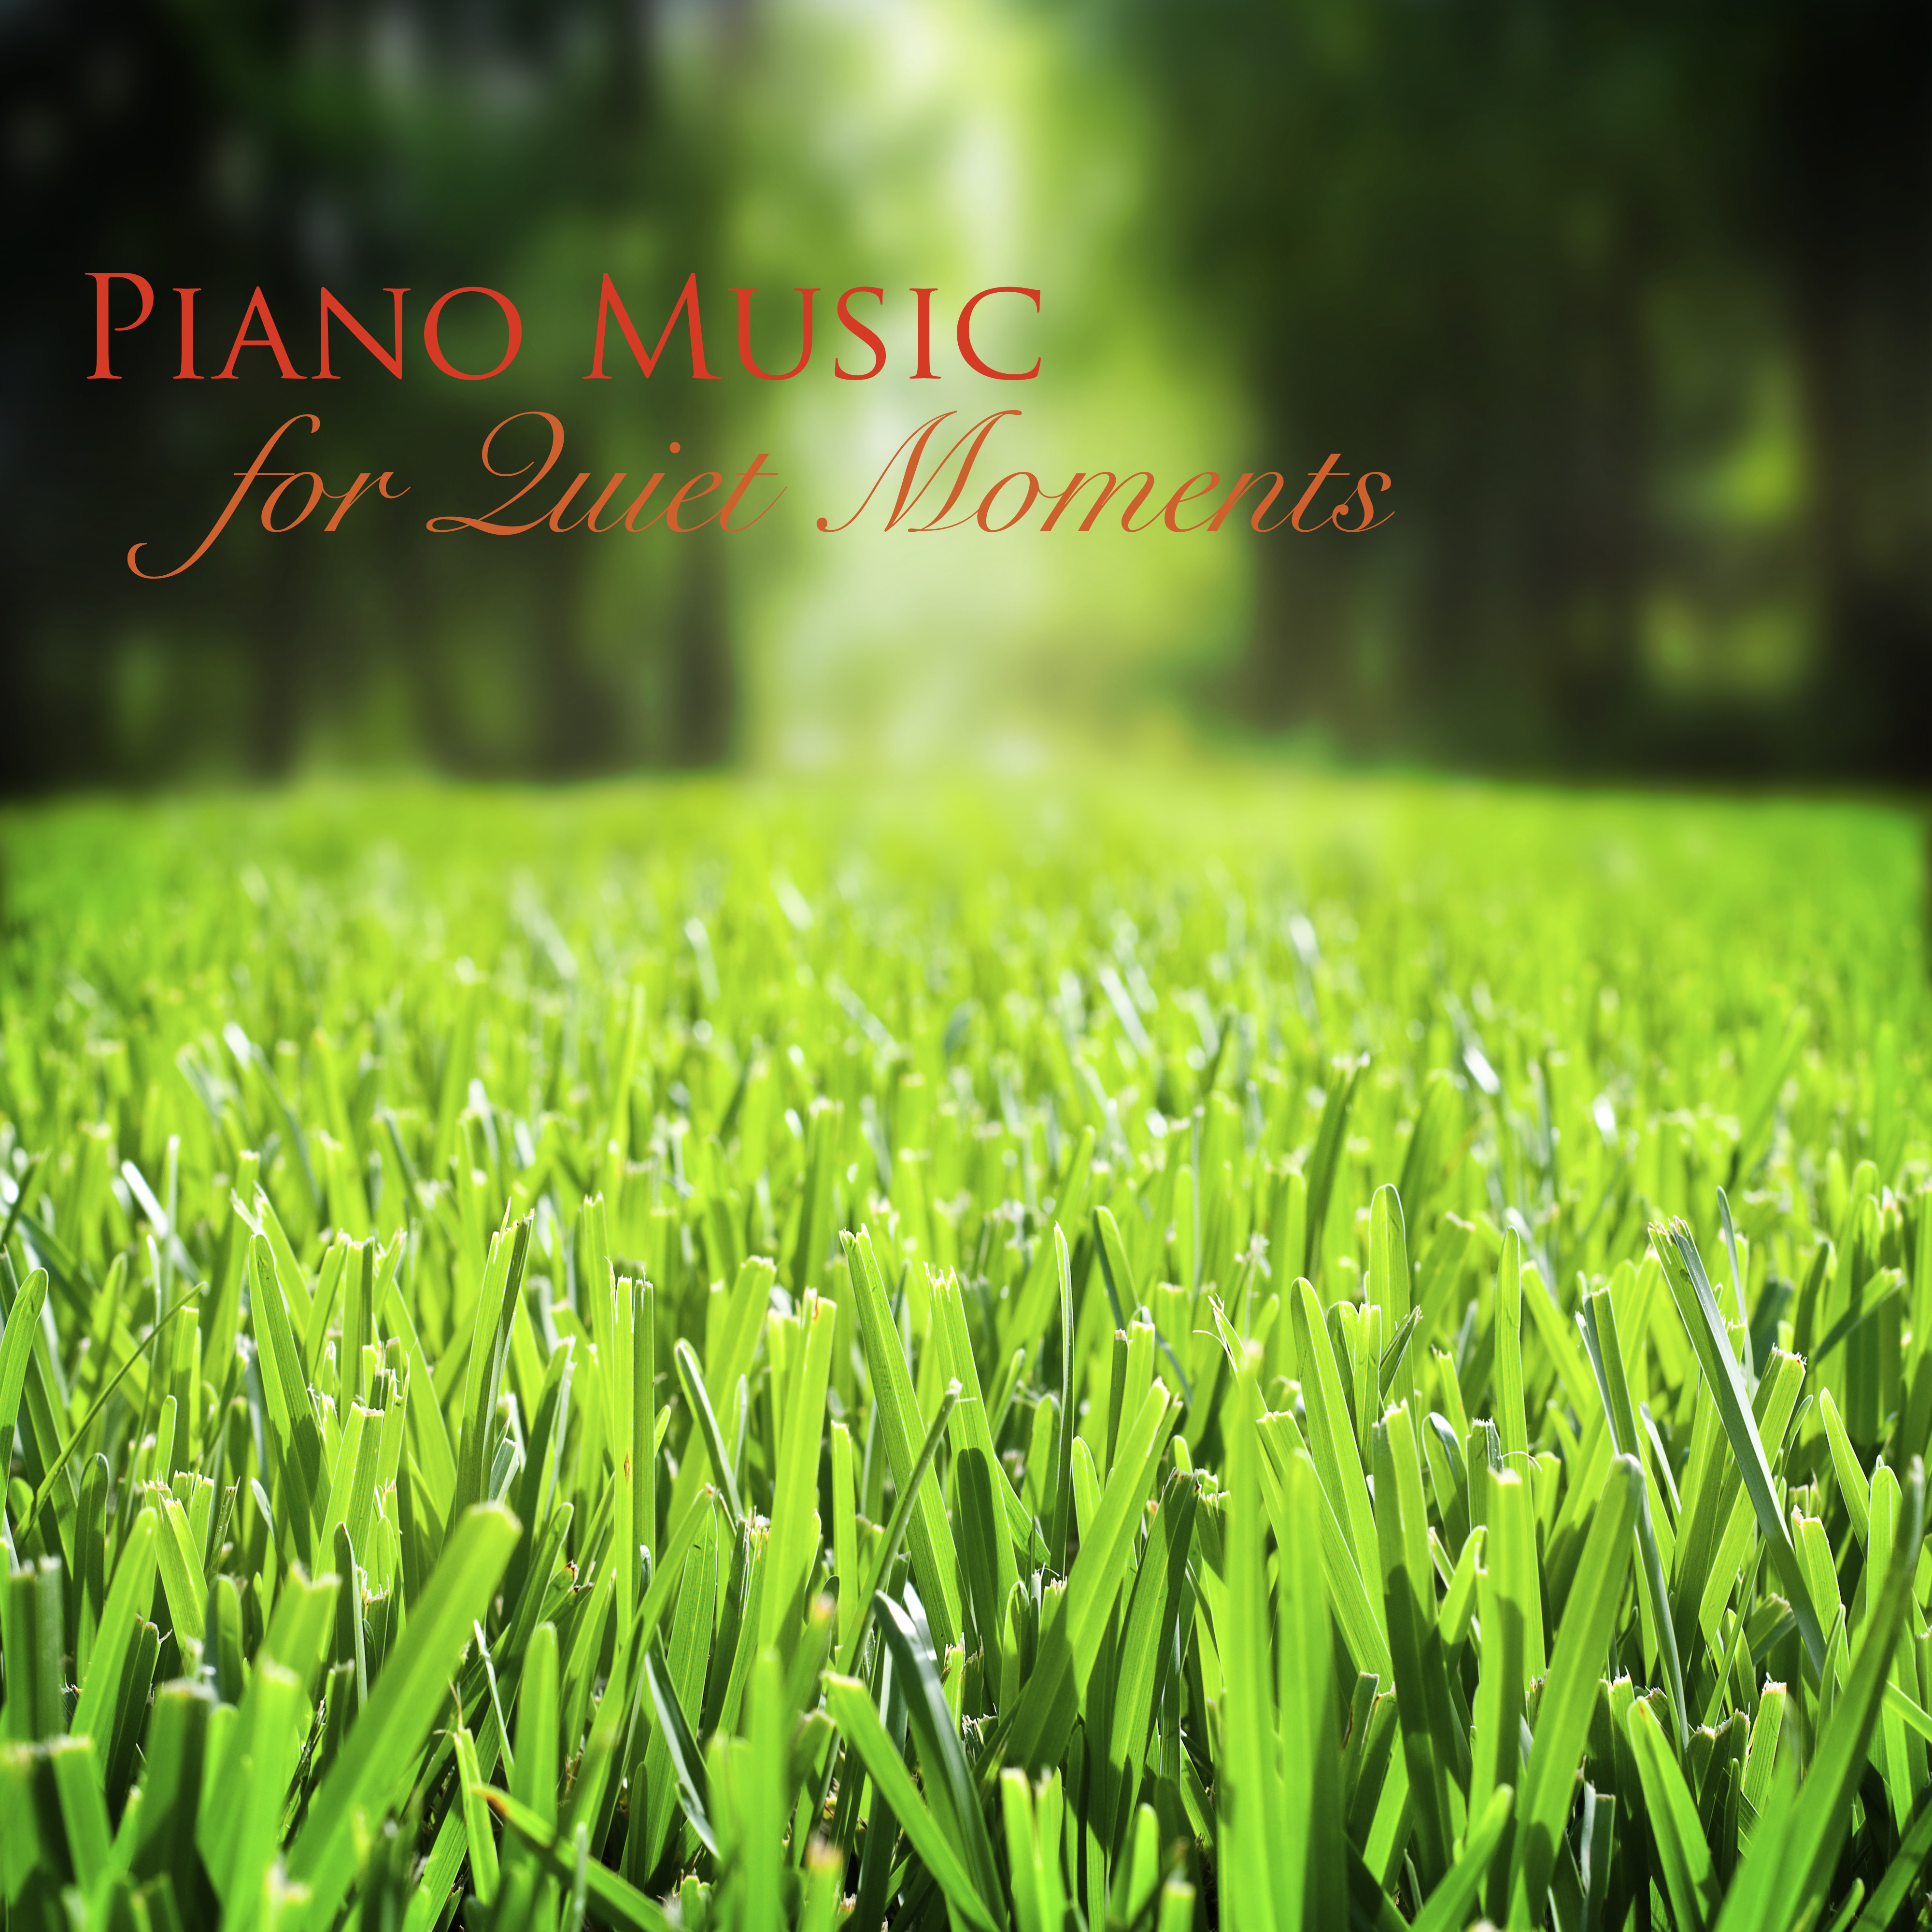 Piano Music for Quiet Moments - Relaxing Songs and Classical Piano Pieces